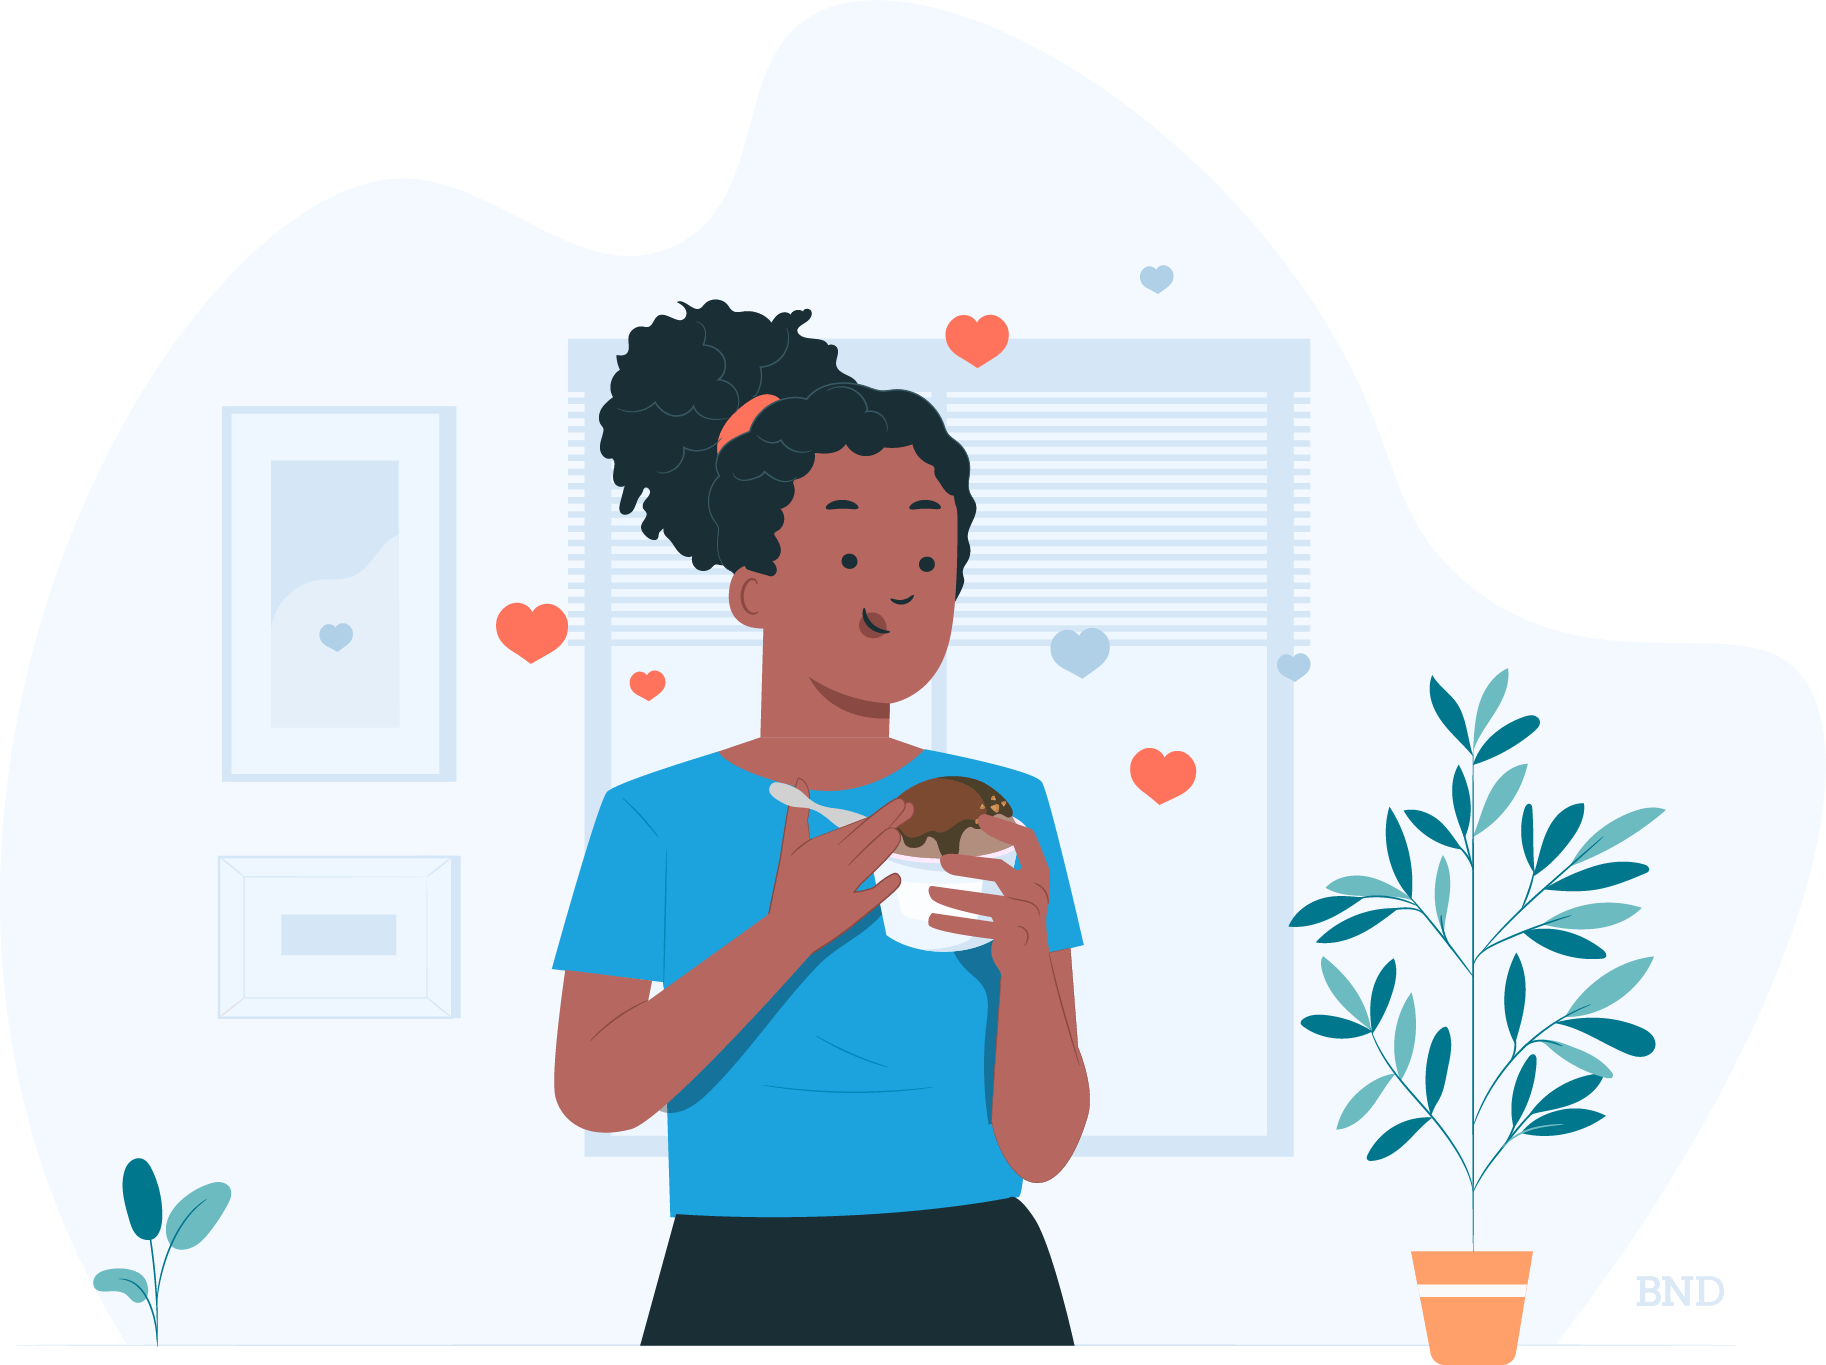 graphic of a person eating ice cream surrounded by heart icons